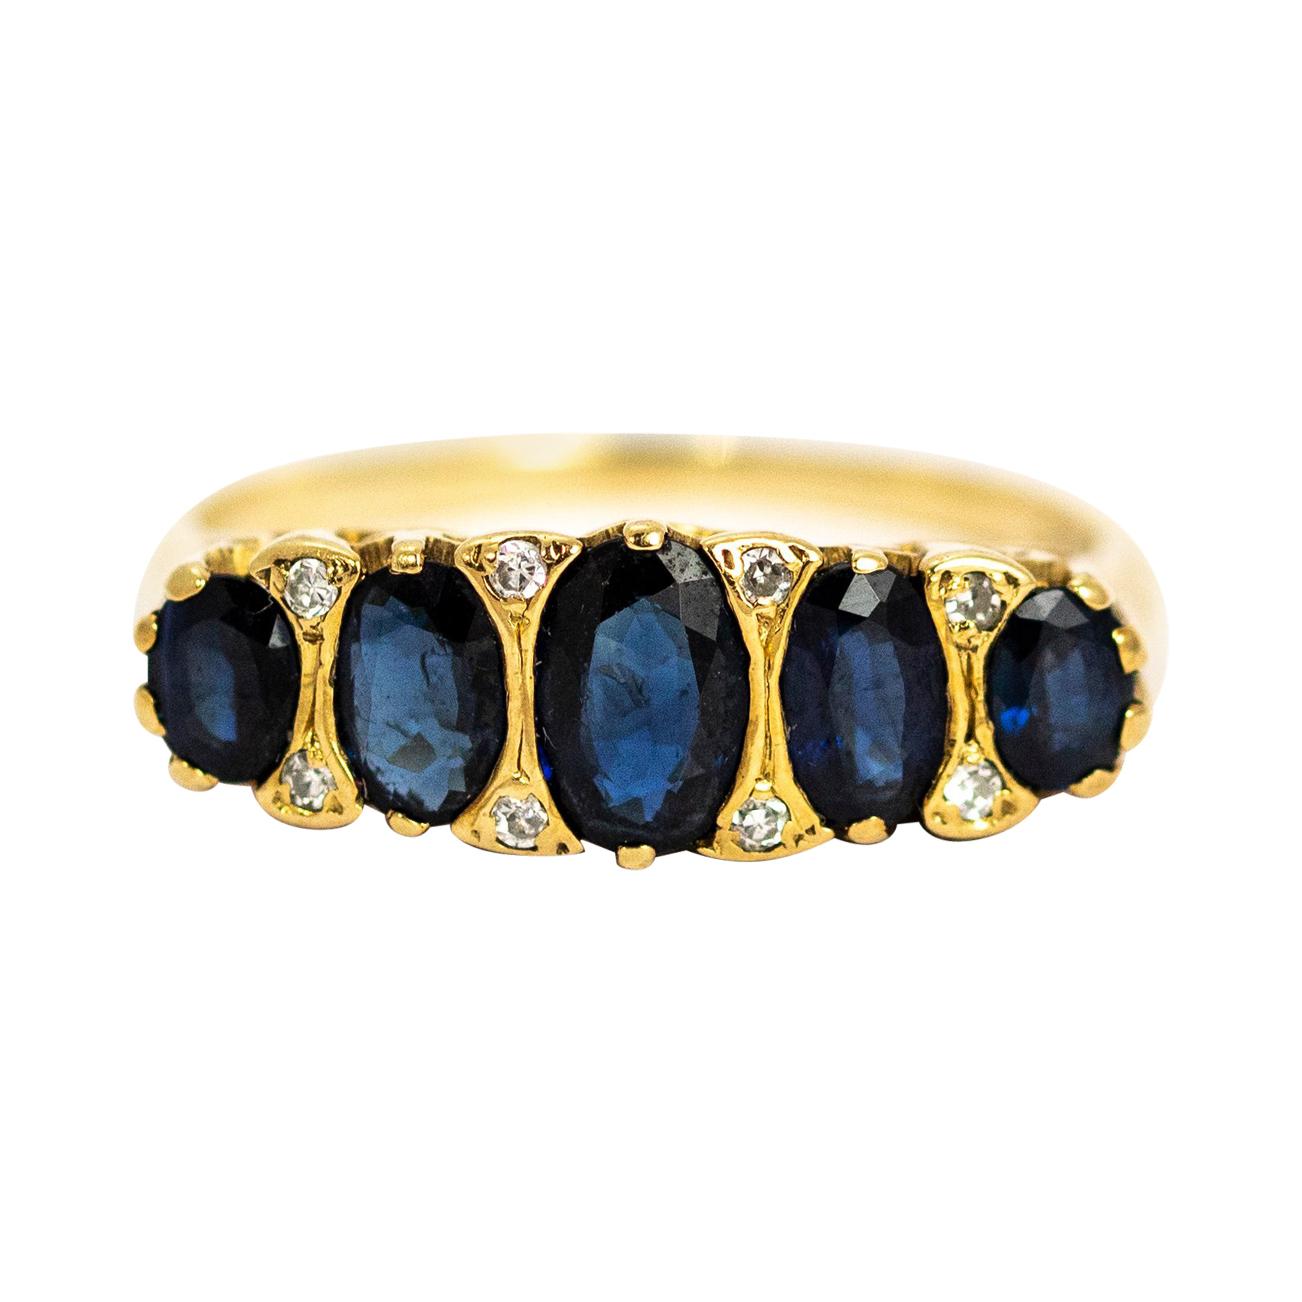 Vintage Sapphire and 9 Carat Gold Ring